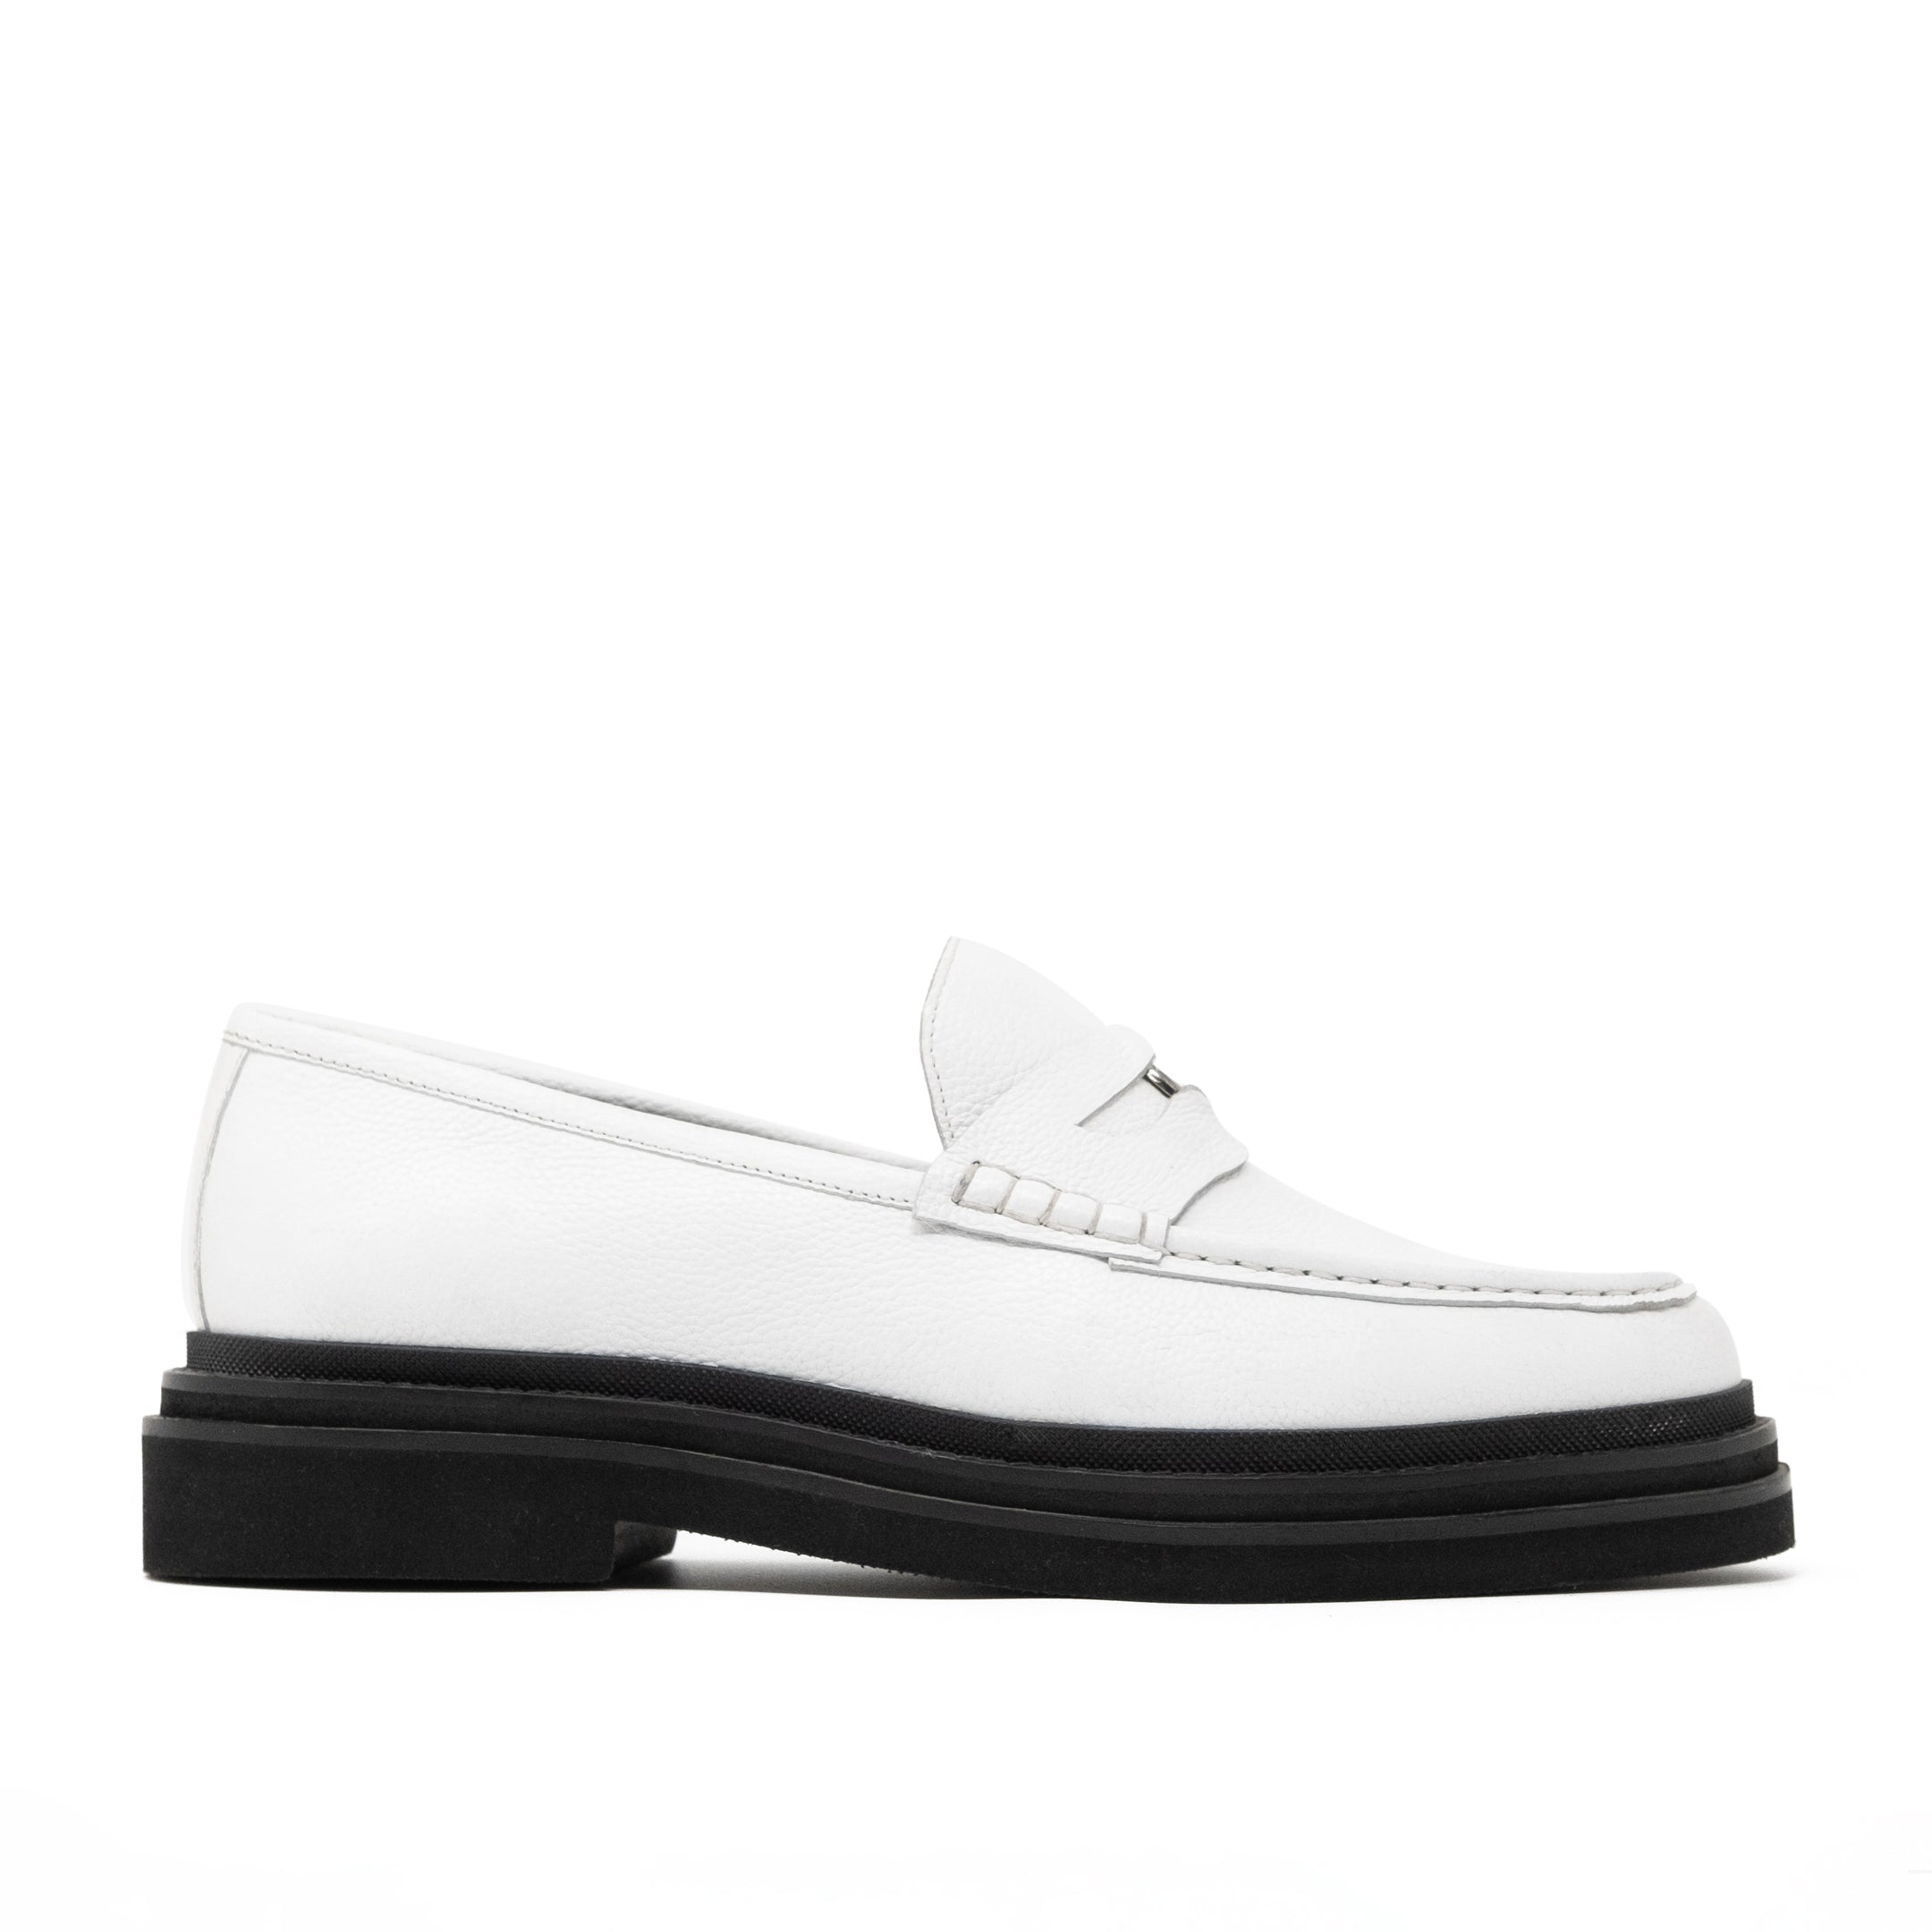 Walk Londdpn Brooklyn Penny Loafer in White Leather